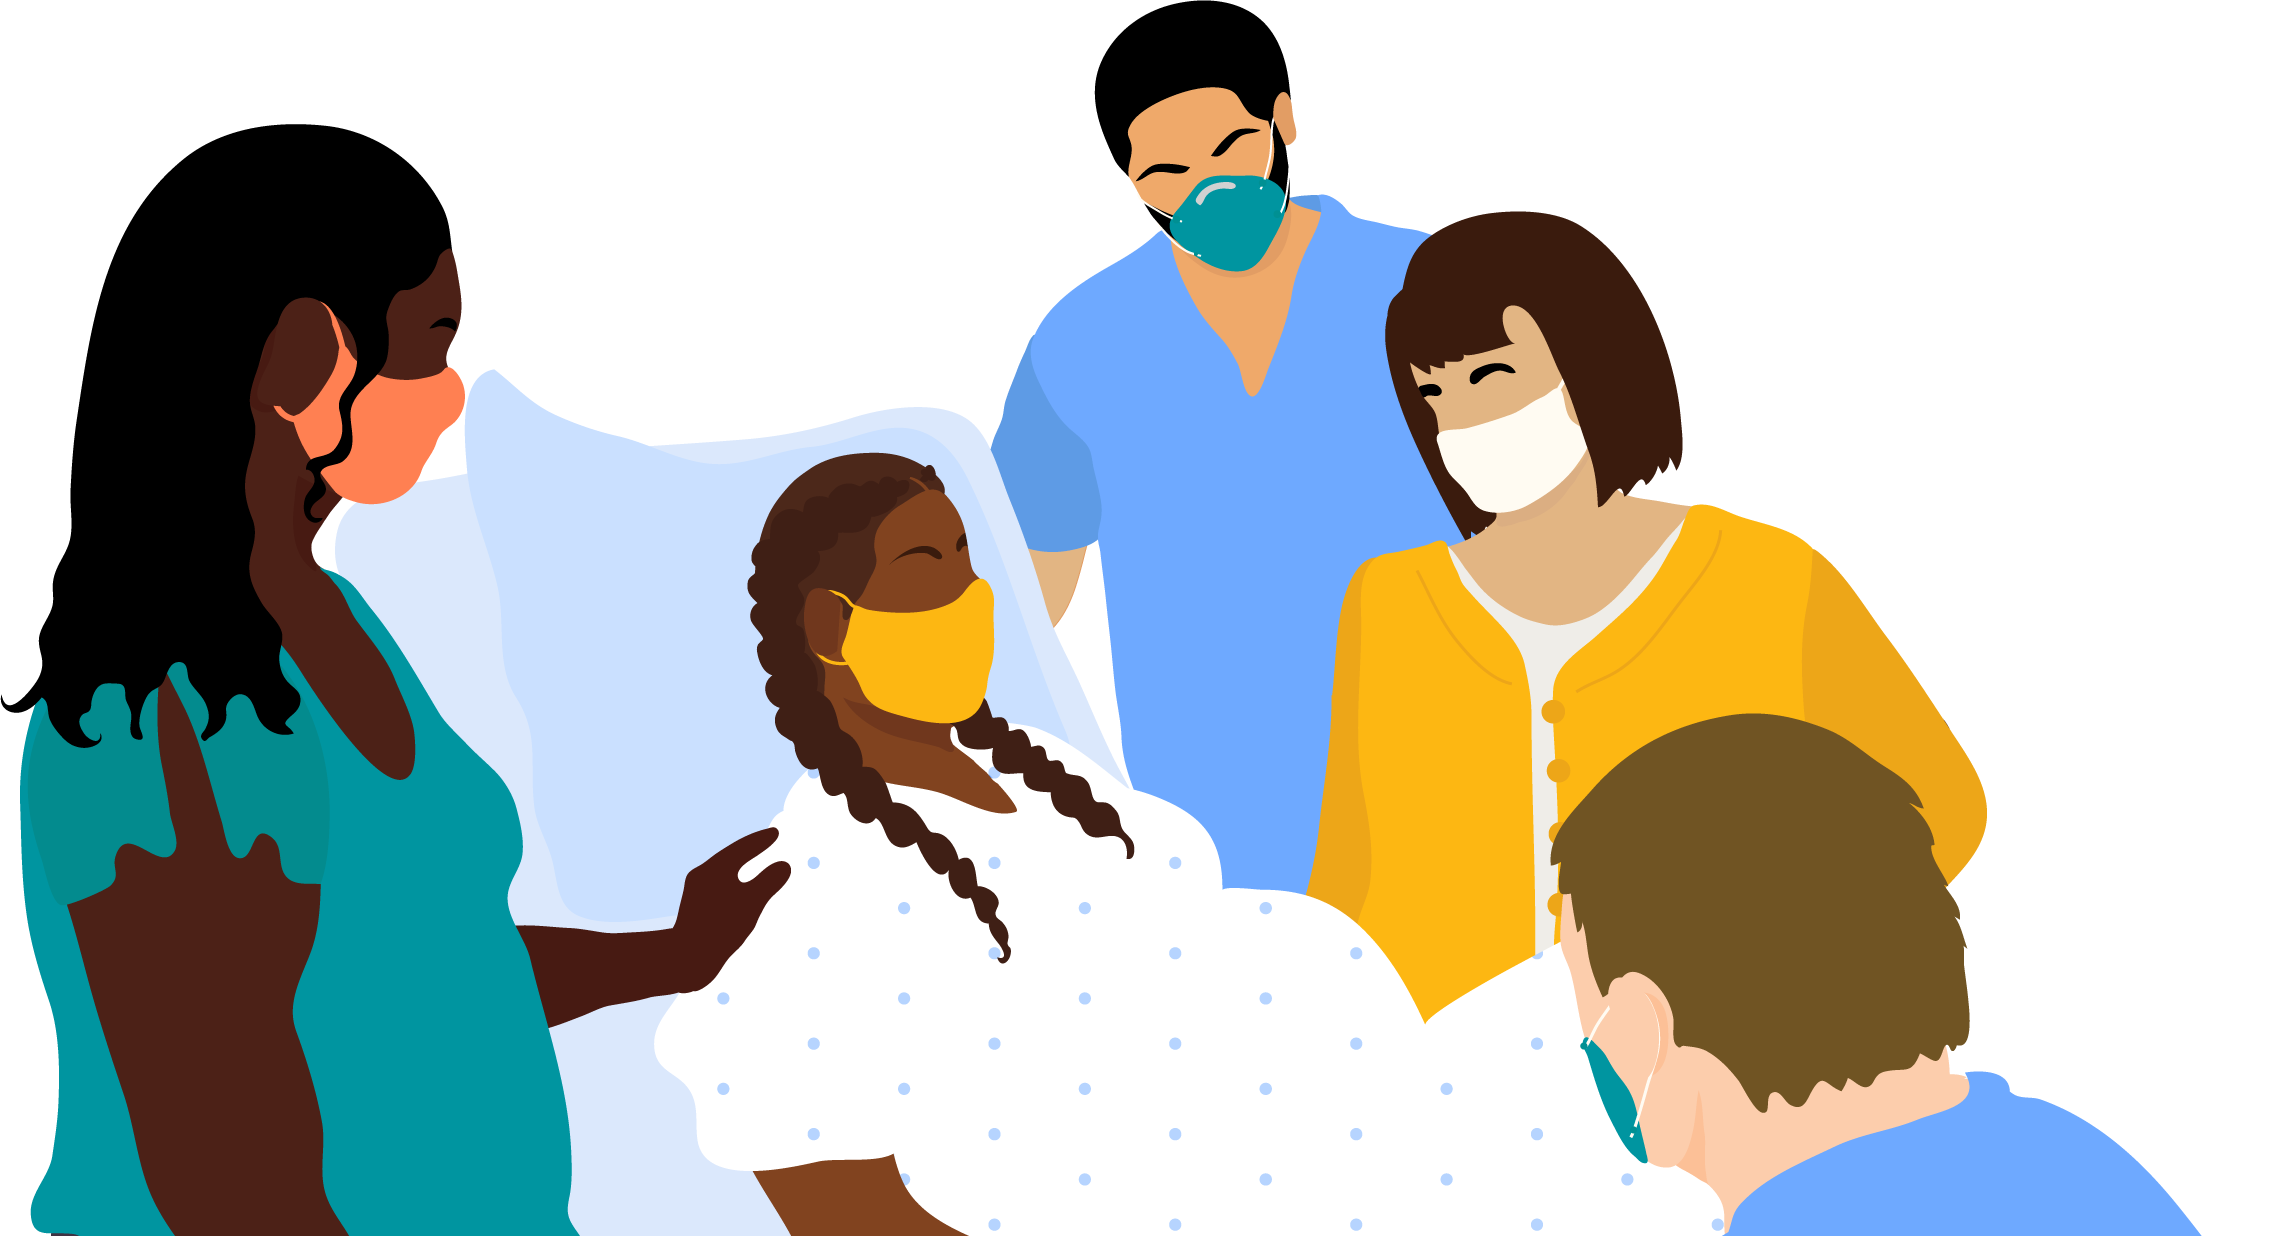 A pregnant person with braids and a mask lays in a hospital bed, surrounded by their female partner and caregivers.